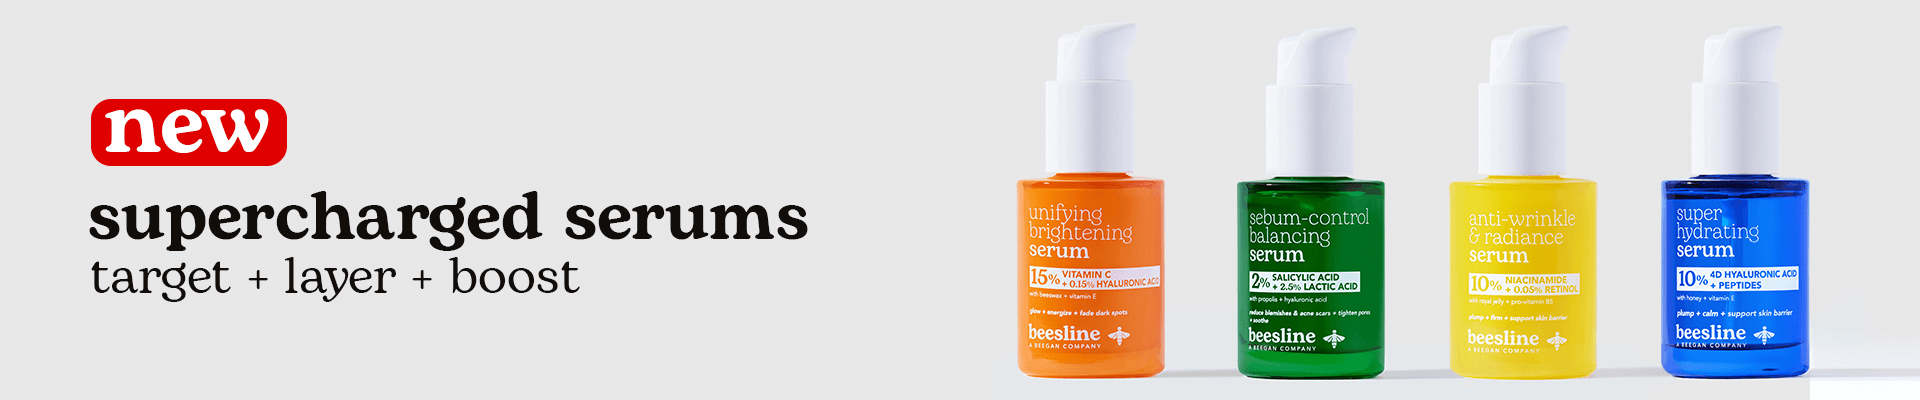 Supercharged Serums